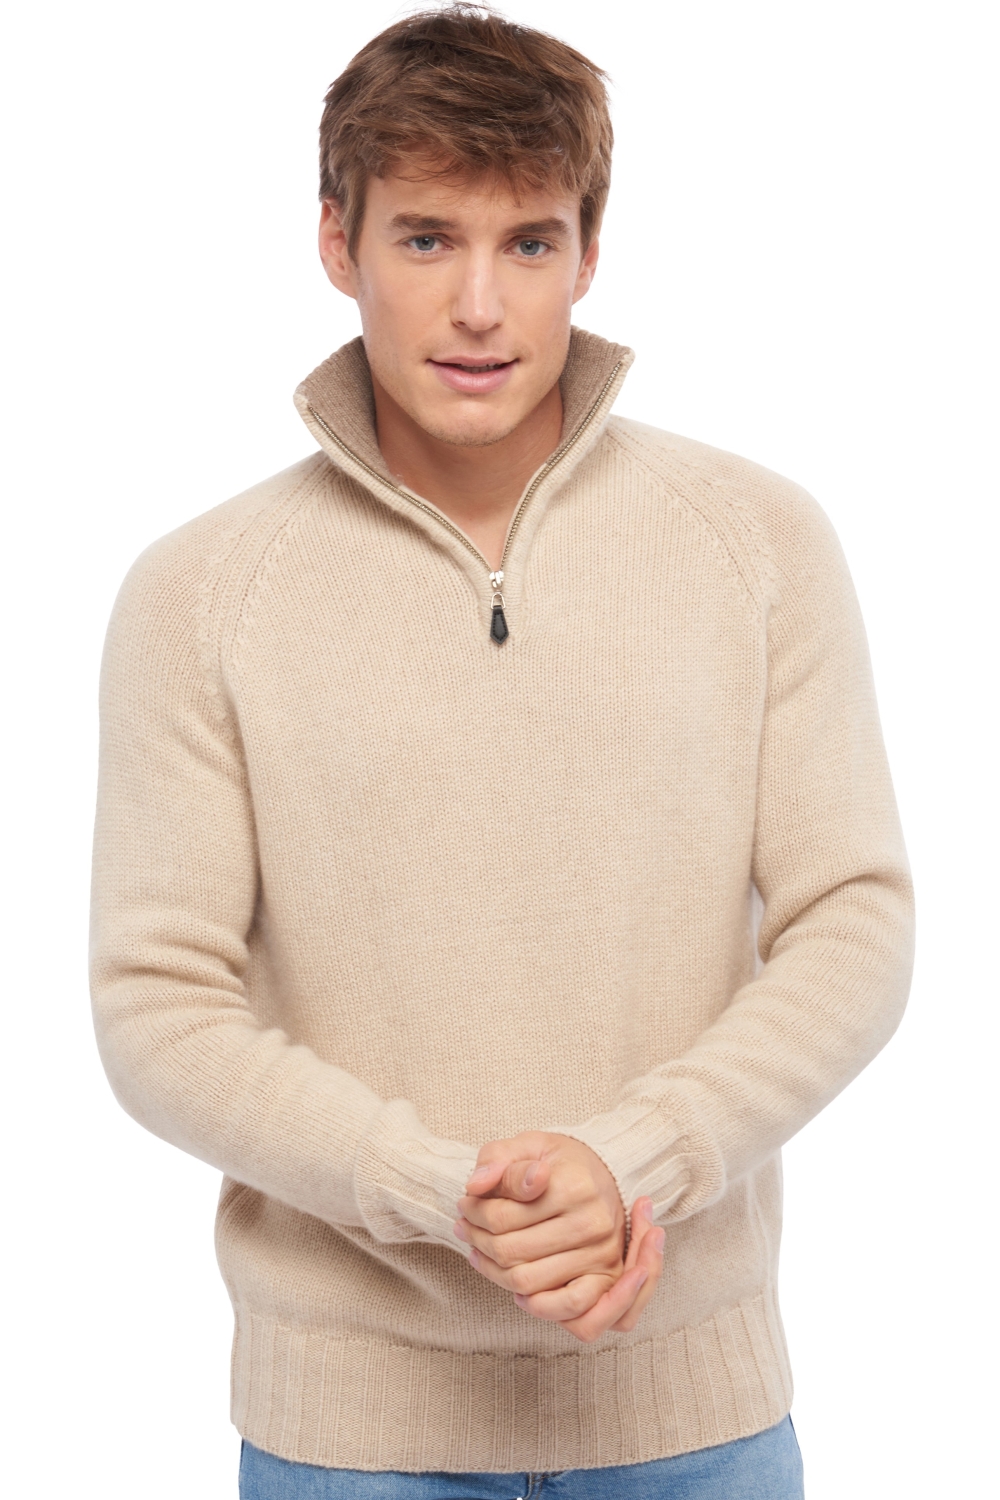 Cashmere men polo style sweaters olivier natural beige natural brown 2xl